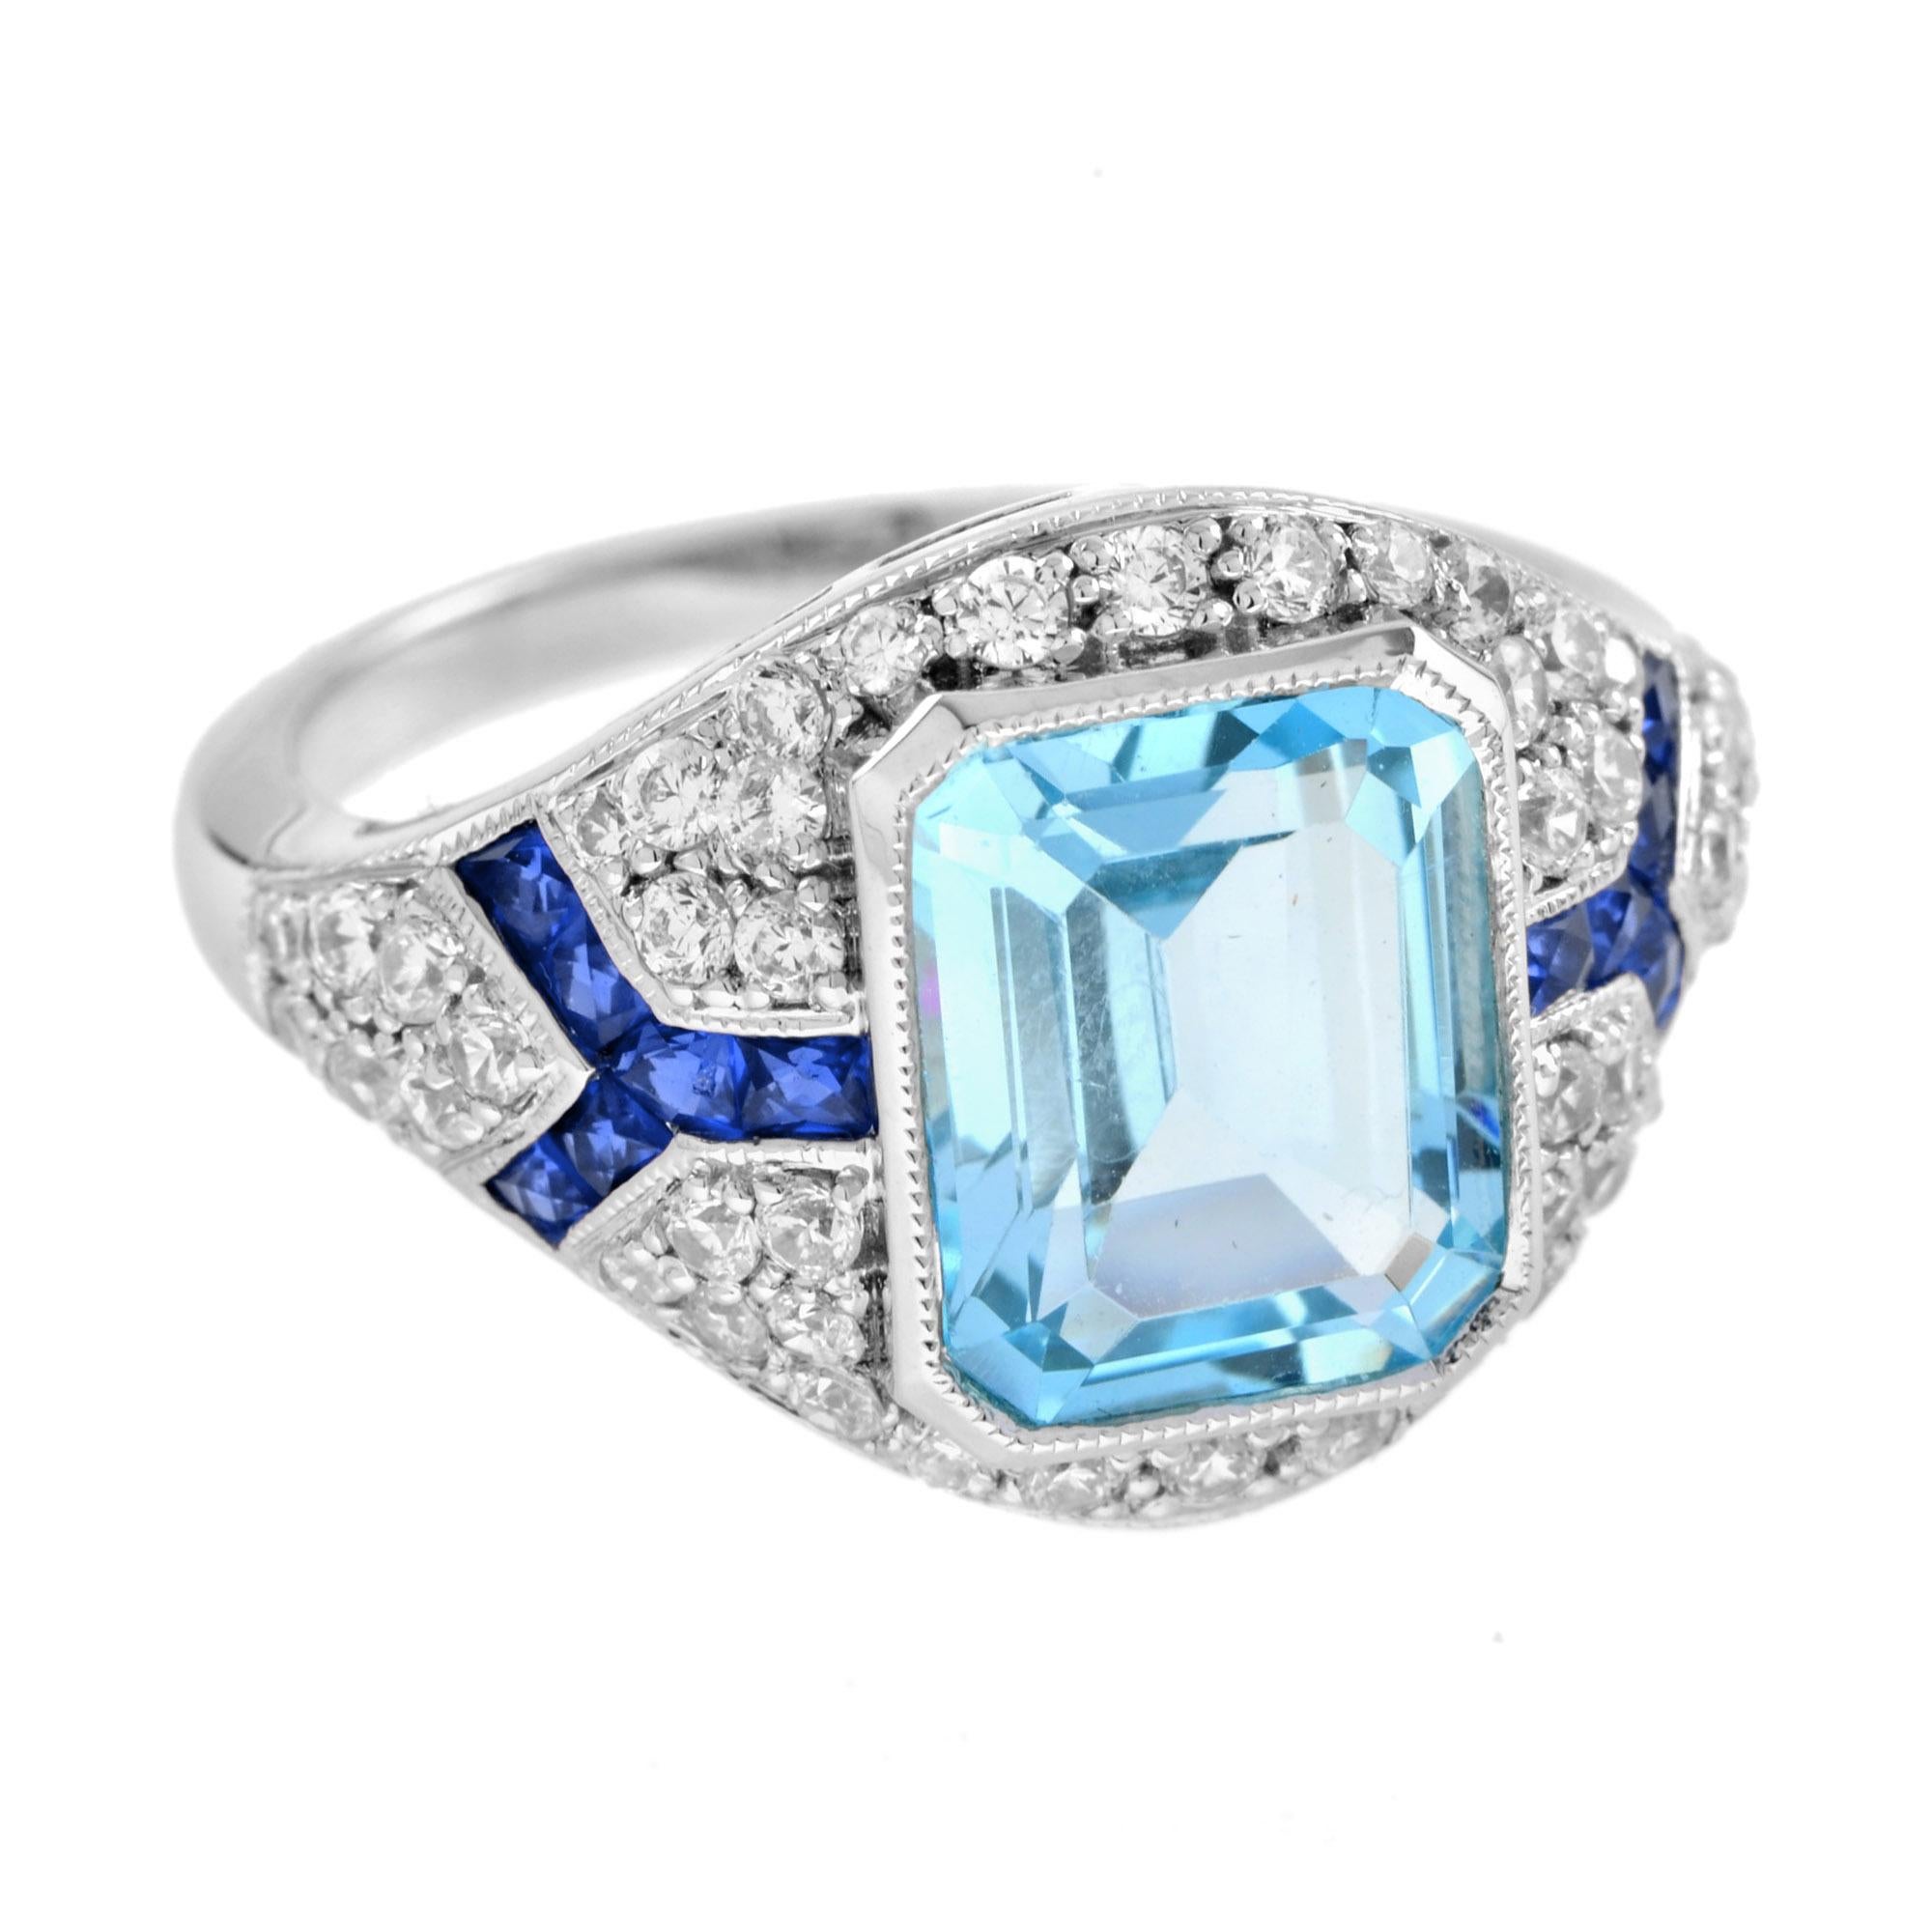 The centerpiece of the ring is a 4.5 carats emerald cut blue topaz highlight by .60 carat round brilliant diamonds. The sides of the polished 18k white gold ring are edged with blue sapphire for an extra touch of elegance.   

Ring